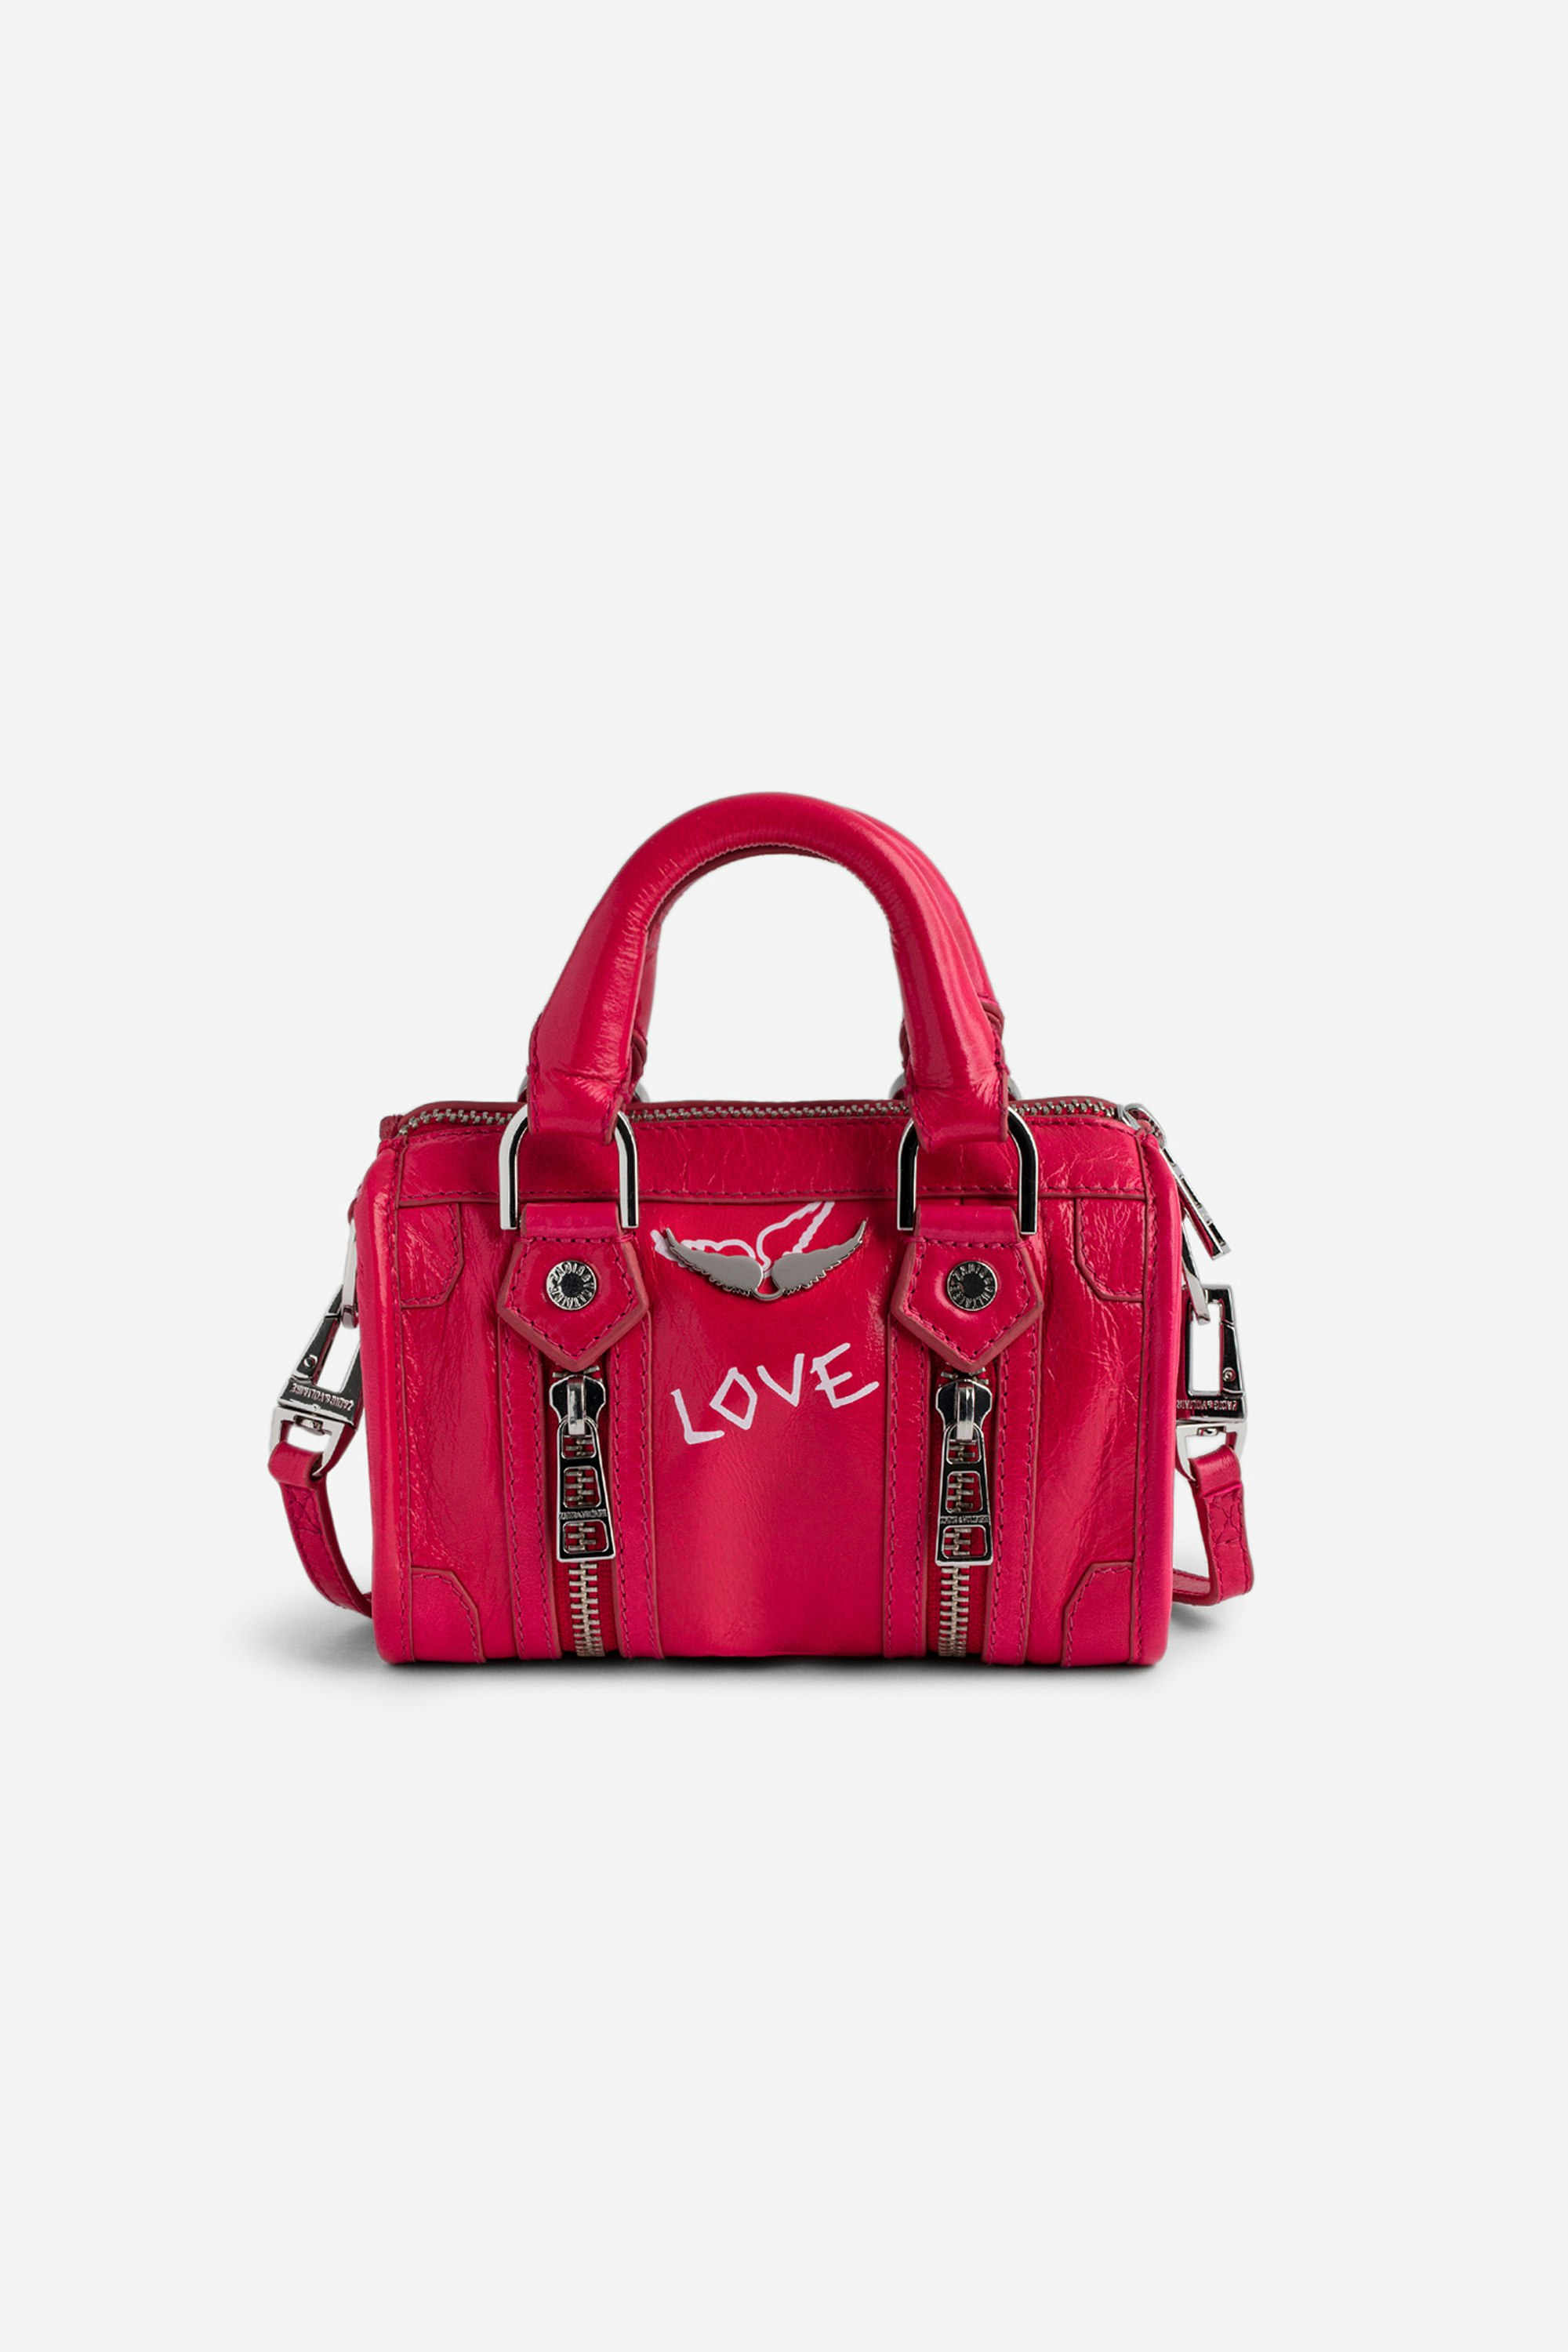 Sunny Nano #2 Tag Bag Women’s pink vintage-effect patent leather Nano bag with handle and shoulder strap with wings and “Love” tags.